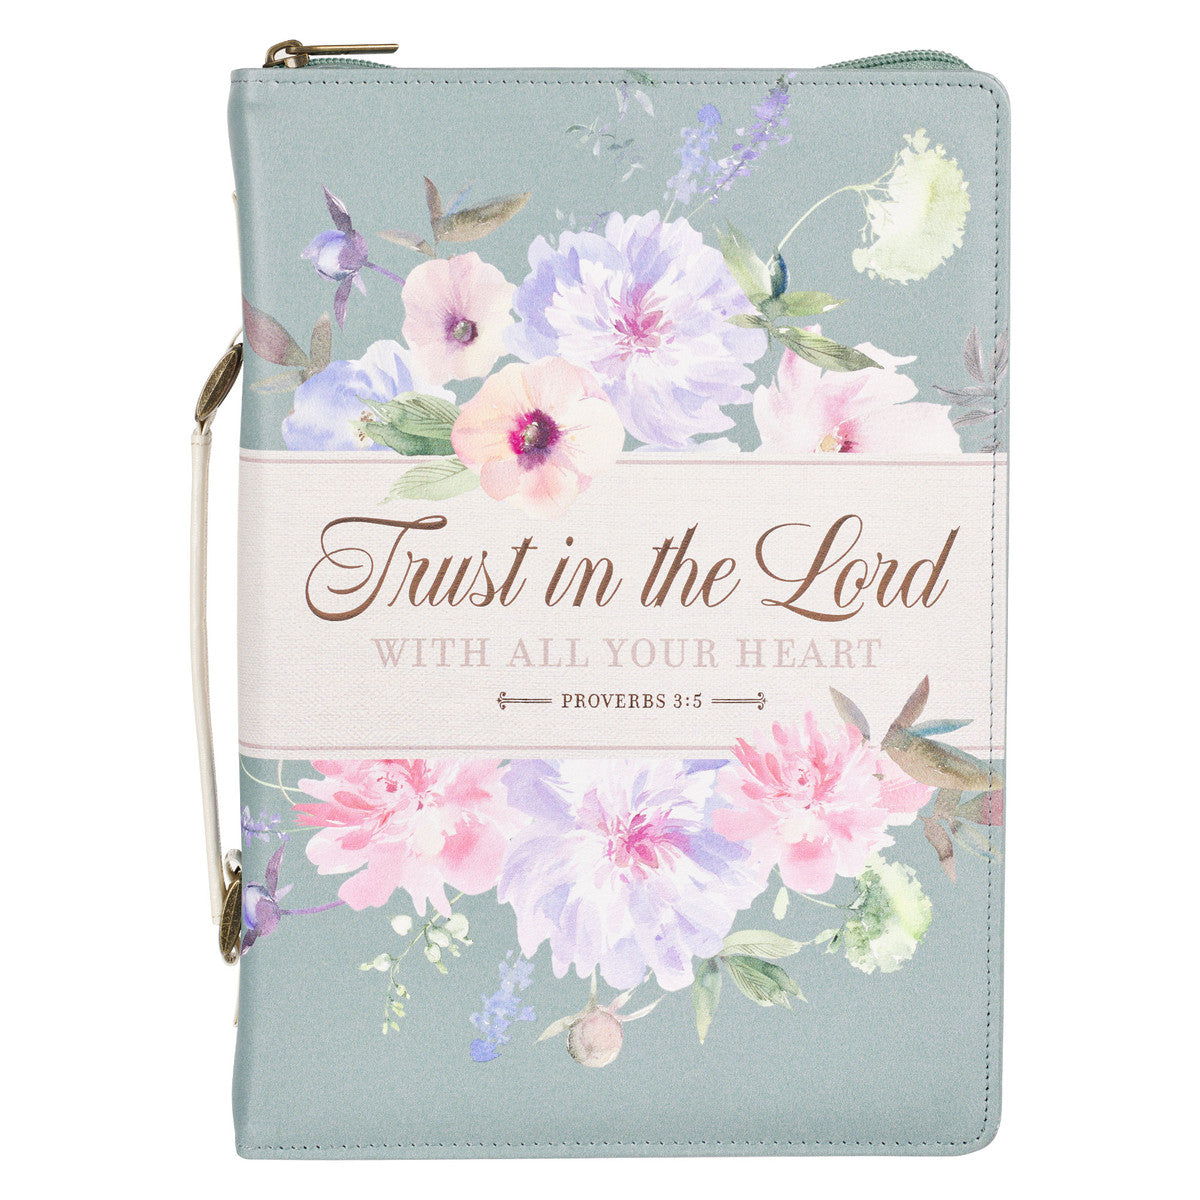 Trust in the Lord Pearlescent Pewter Floral Fashion Bible Cover - Proverbs 3:5